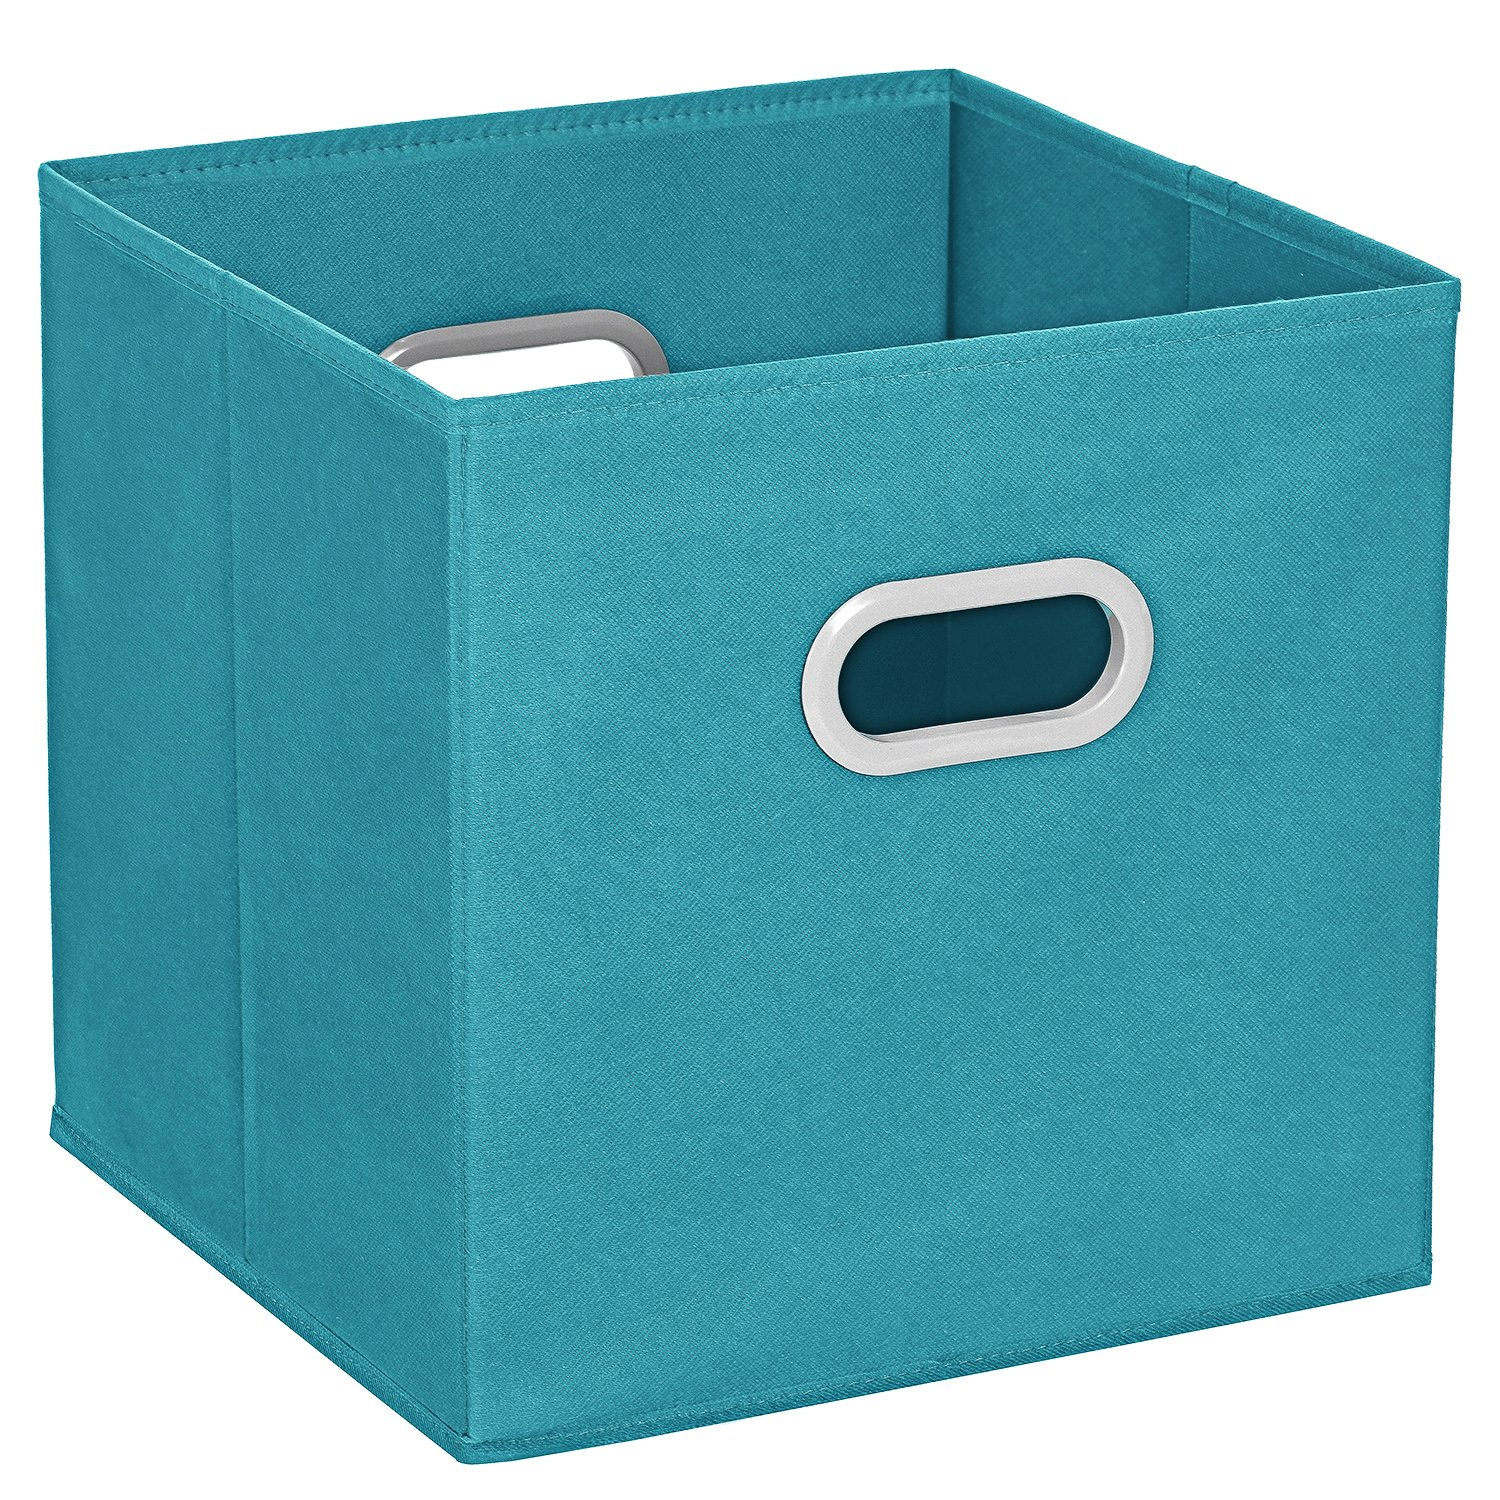 Cloth Storage Bins Maidmax Set Of 6 Nonwoven Foldable Collapsible inside proportions 1500 X 1500